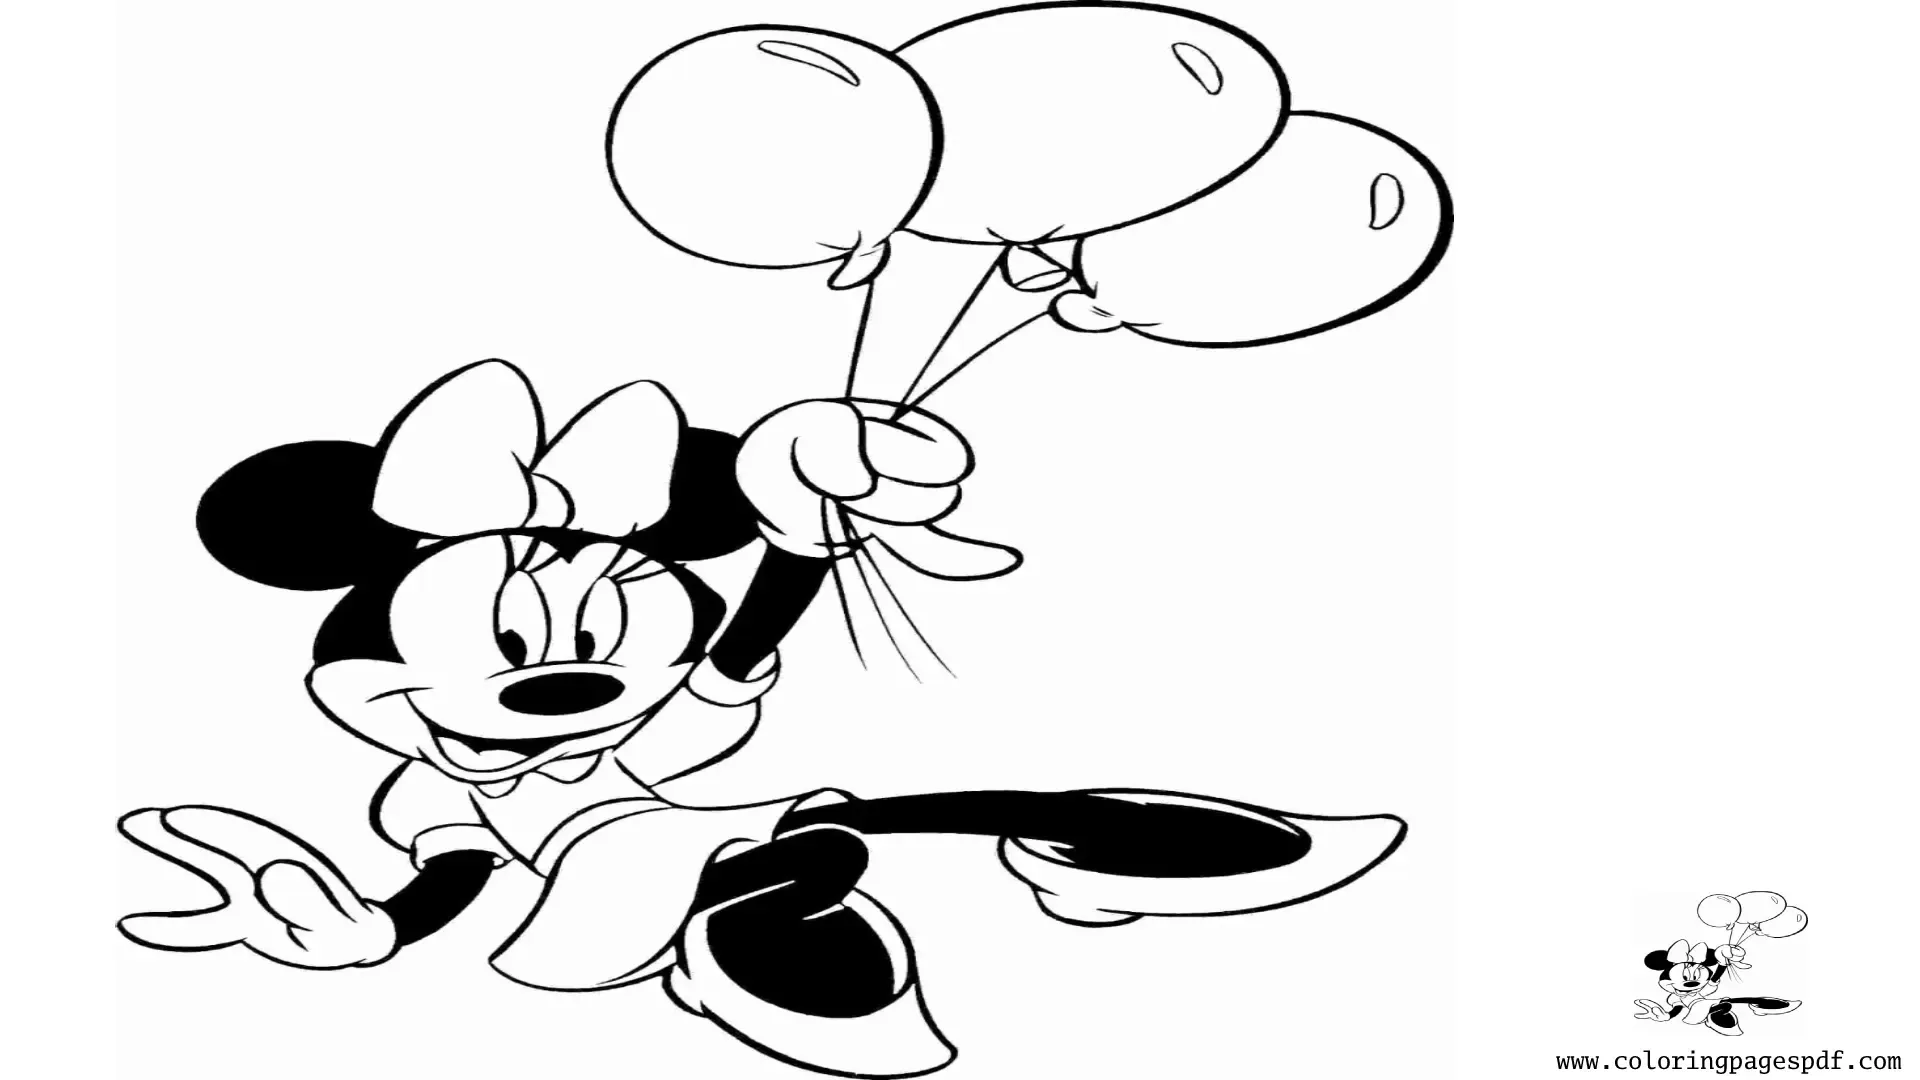 Coloring Pages Of Minnie Mouse Holding Balloons